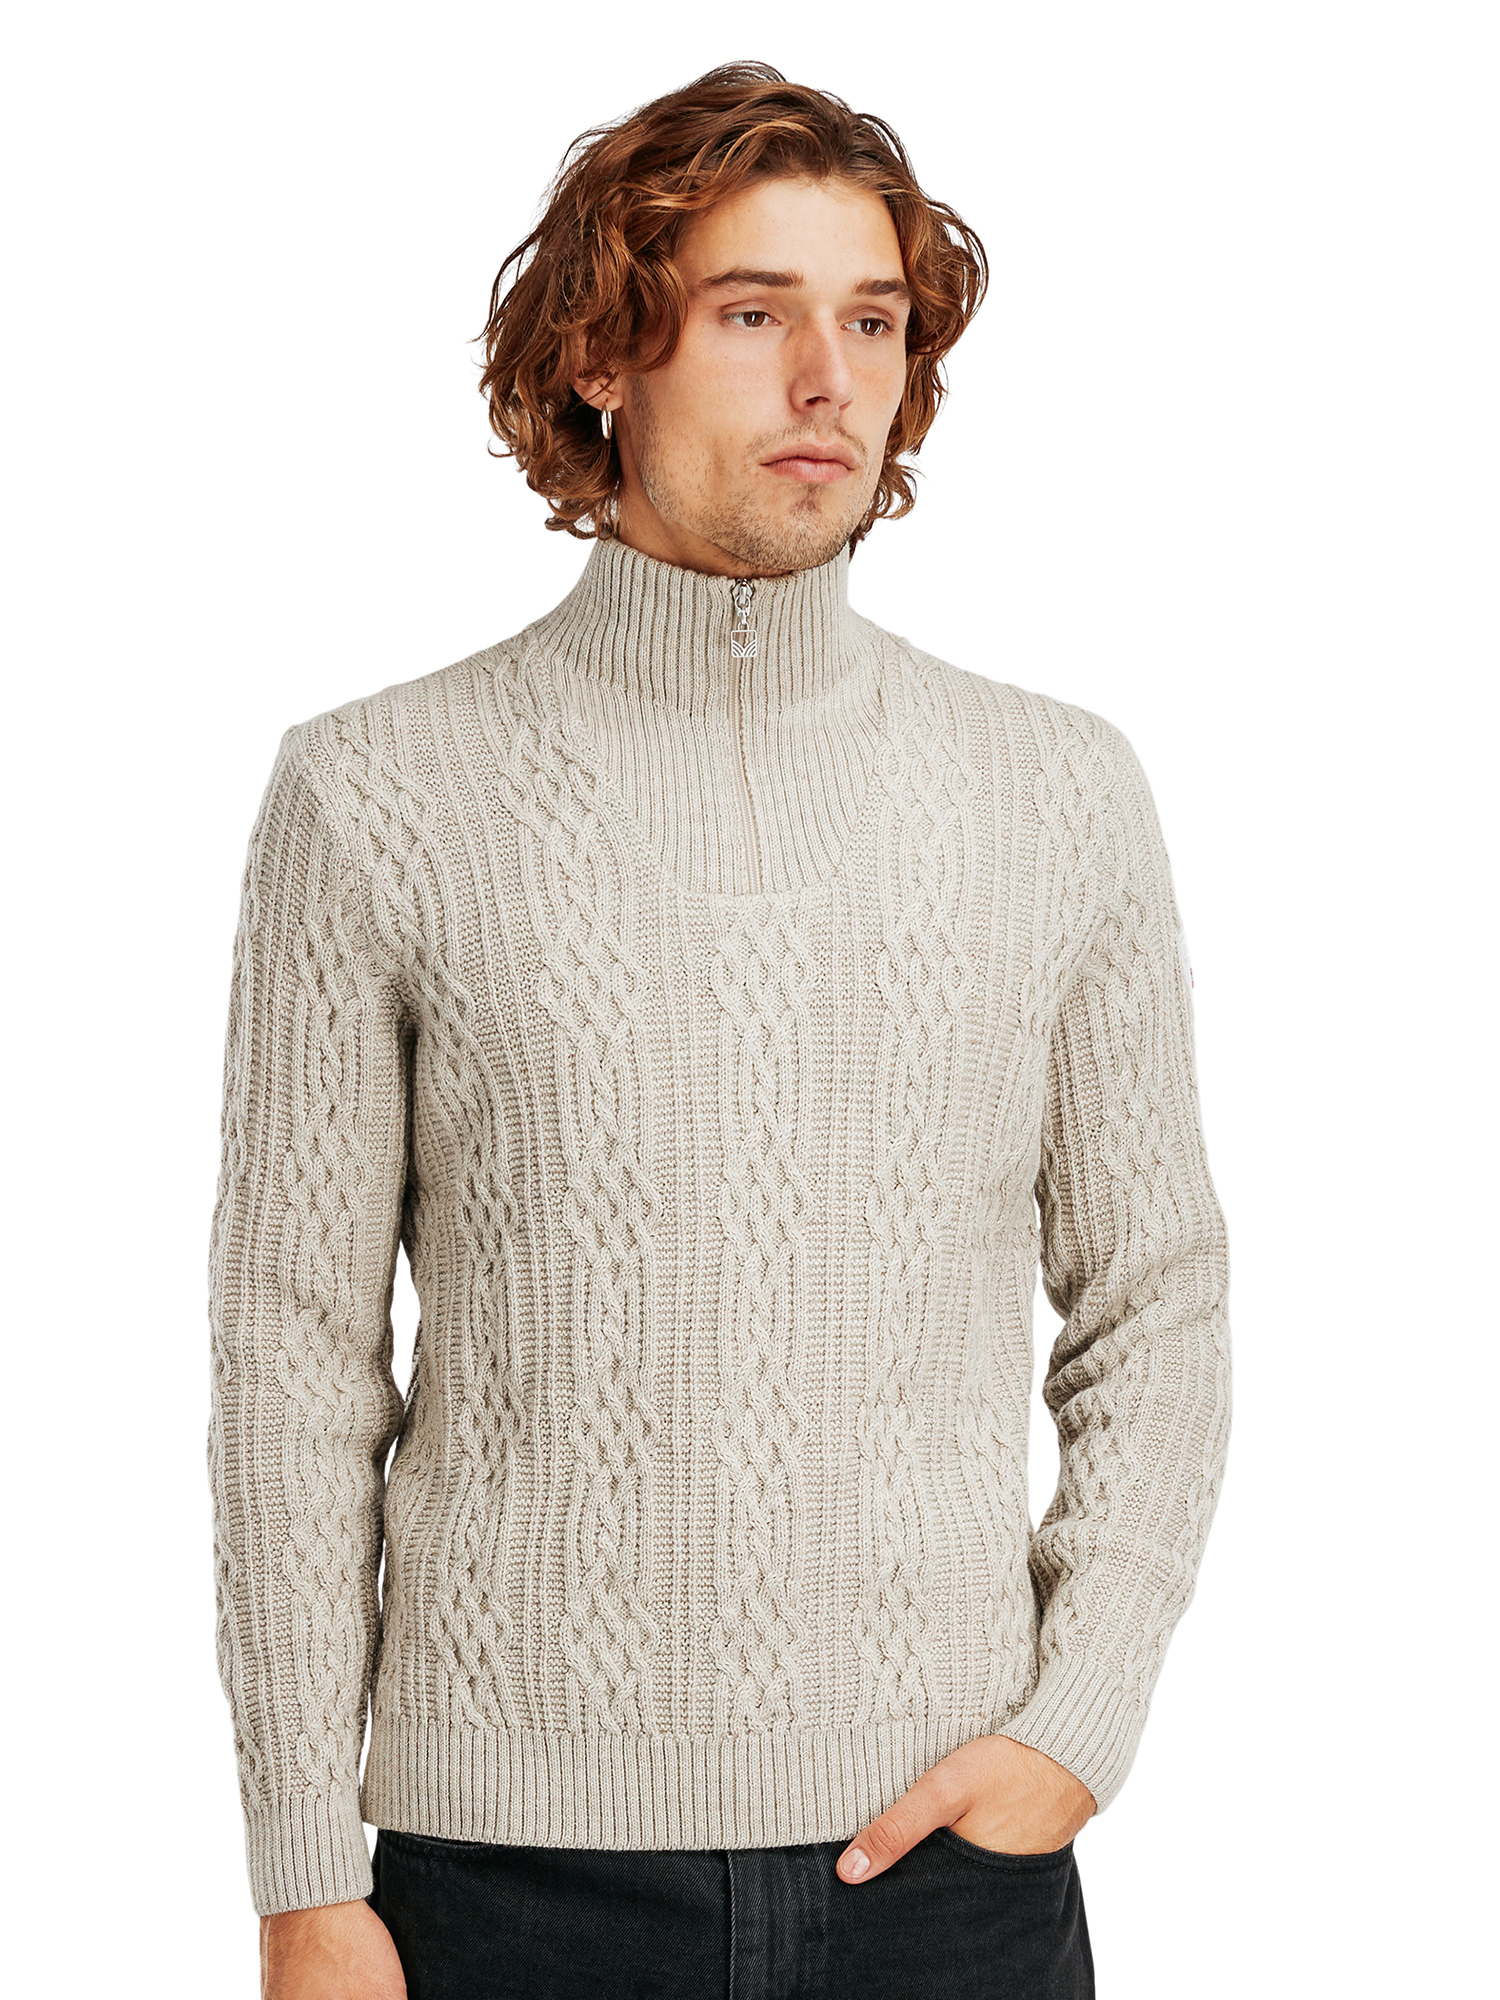 Hoven Knit Sweater - Men - Sand - Dale of Norway - Dale of Norway